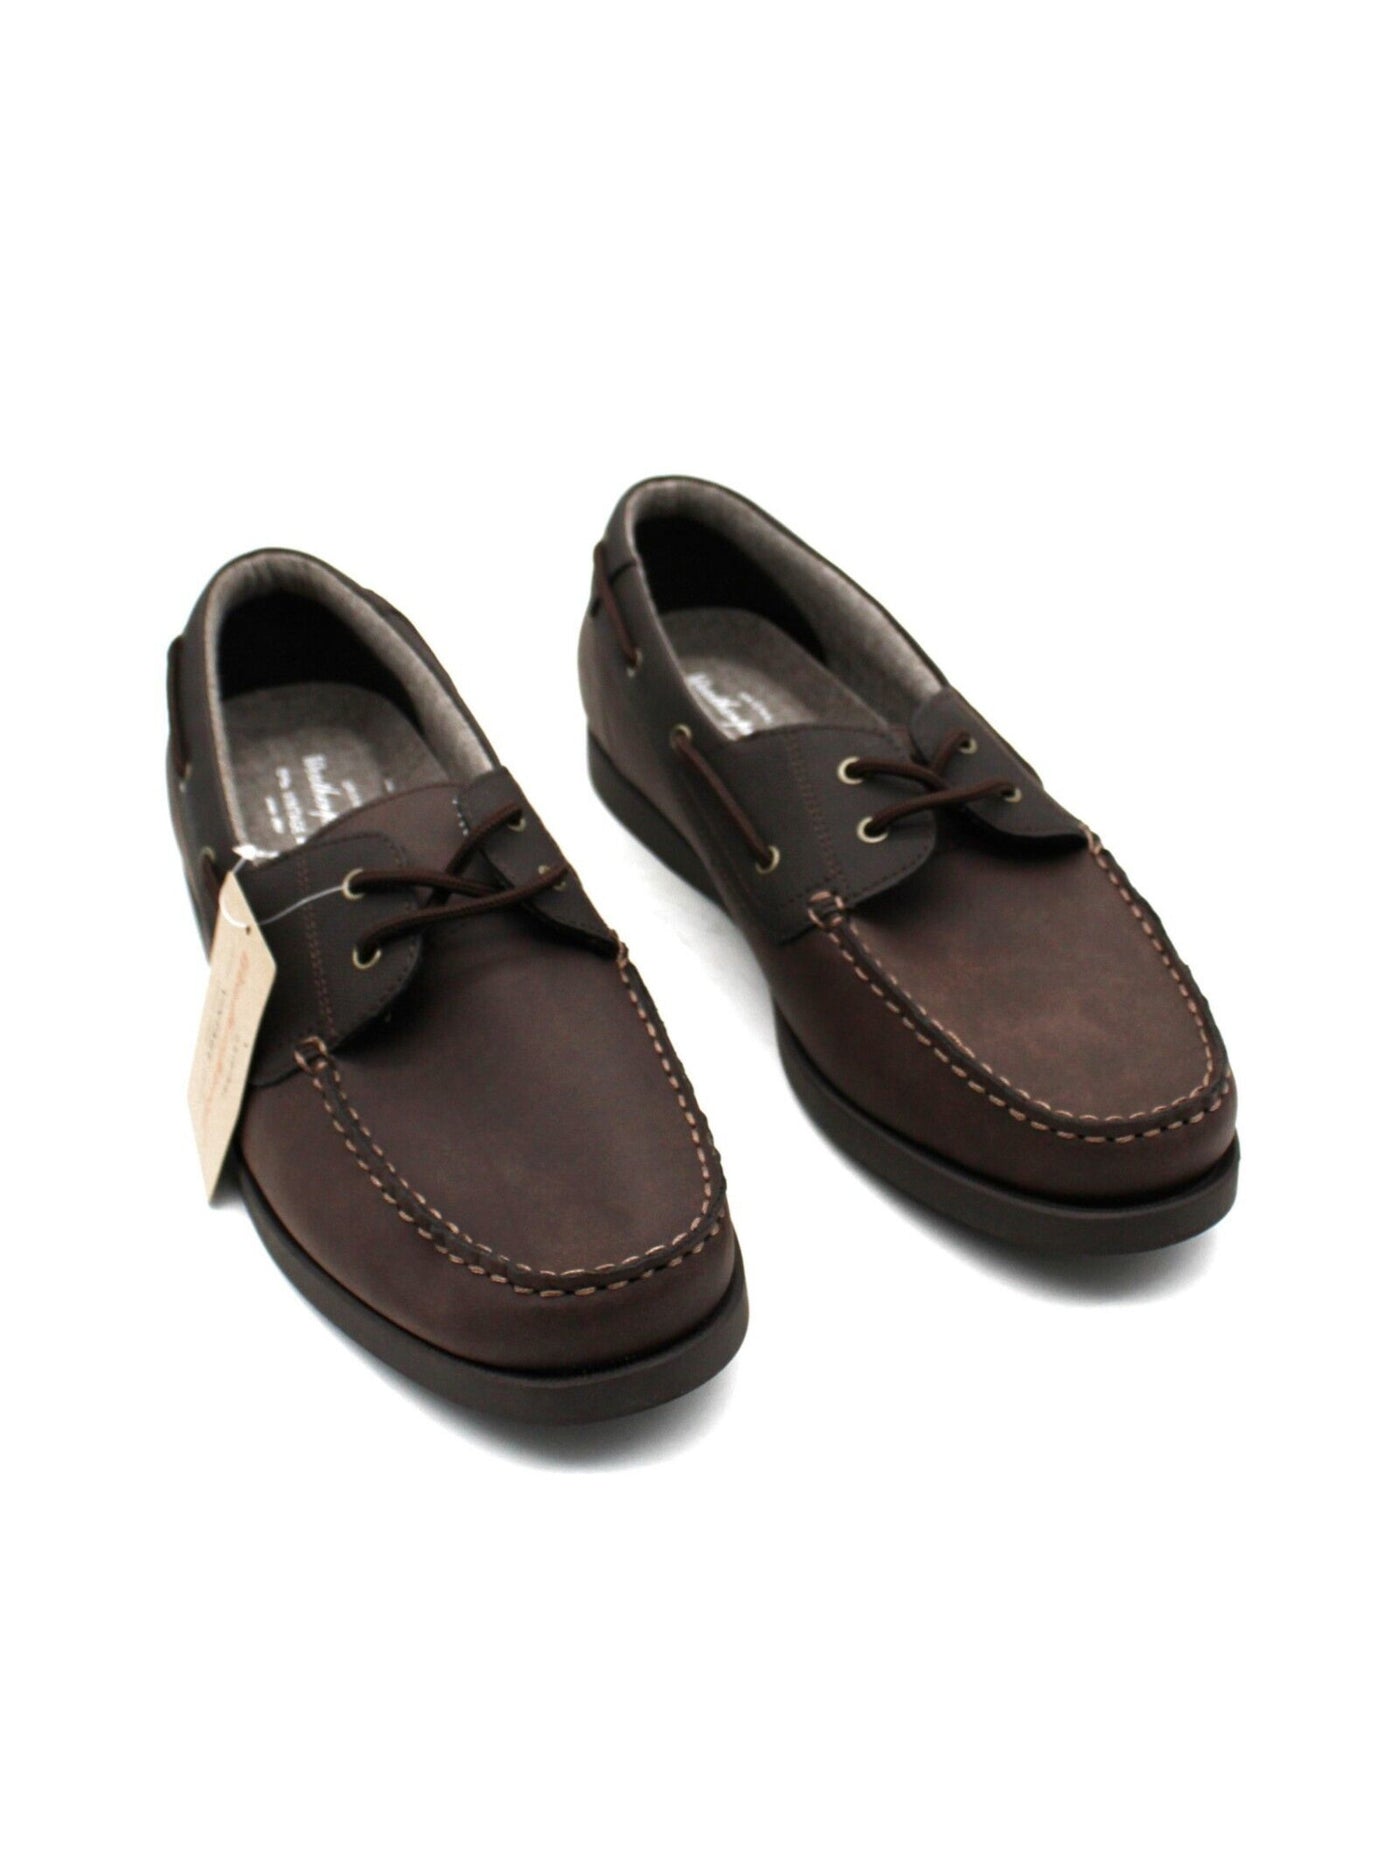 WEATHERPROOF VINTAGE Mens Brown Cushioned Benny Round Toe Lace-Up Boat Shoes 13 M